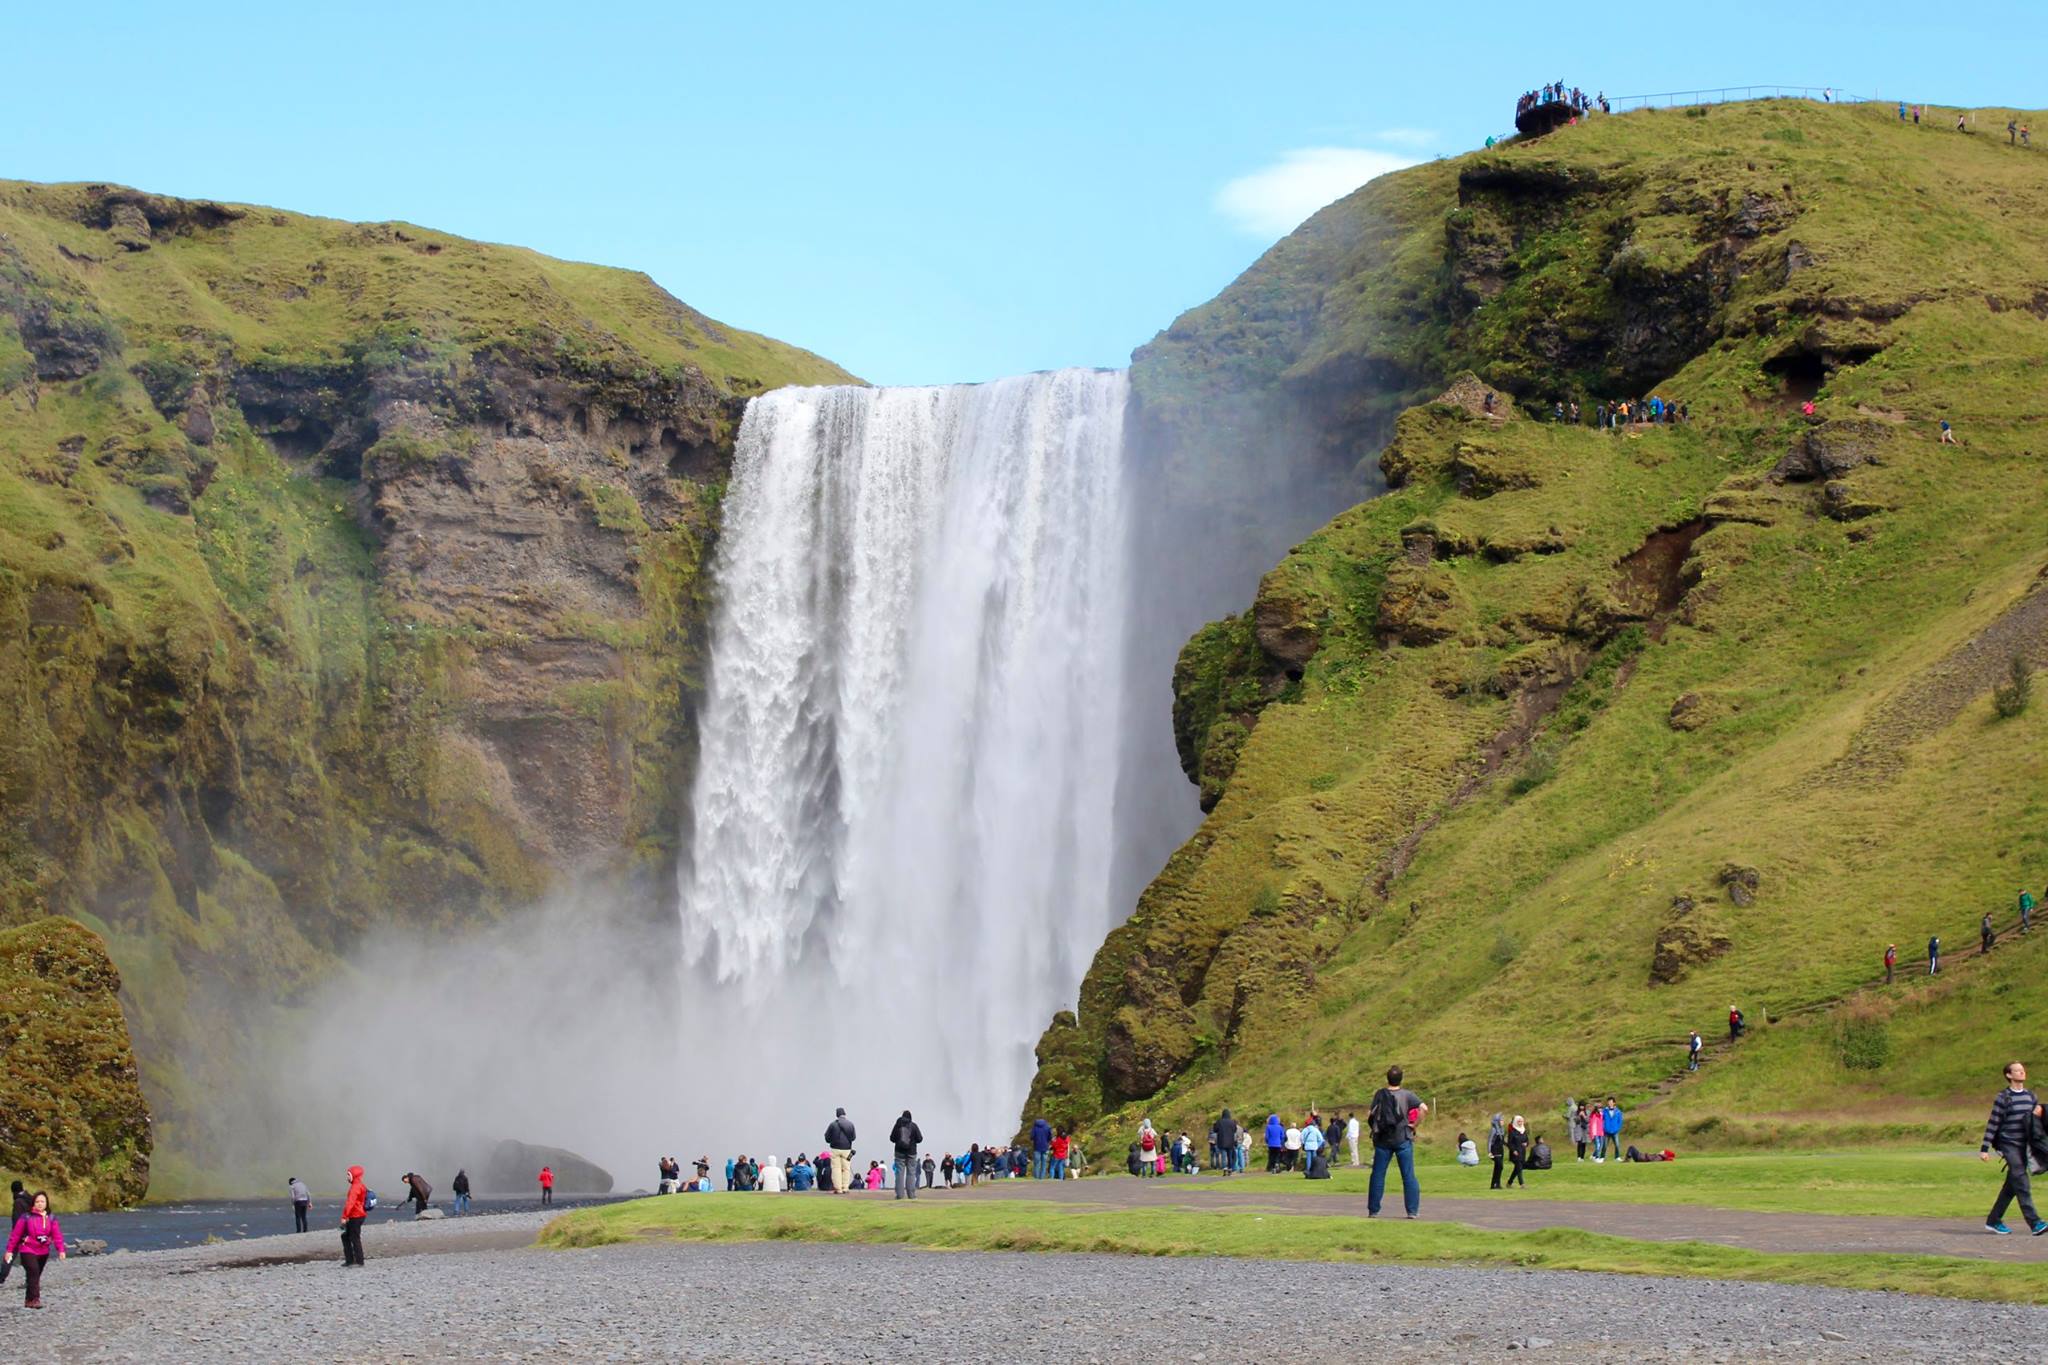 The grand stream of water in Skógafoss Waterfall